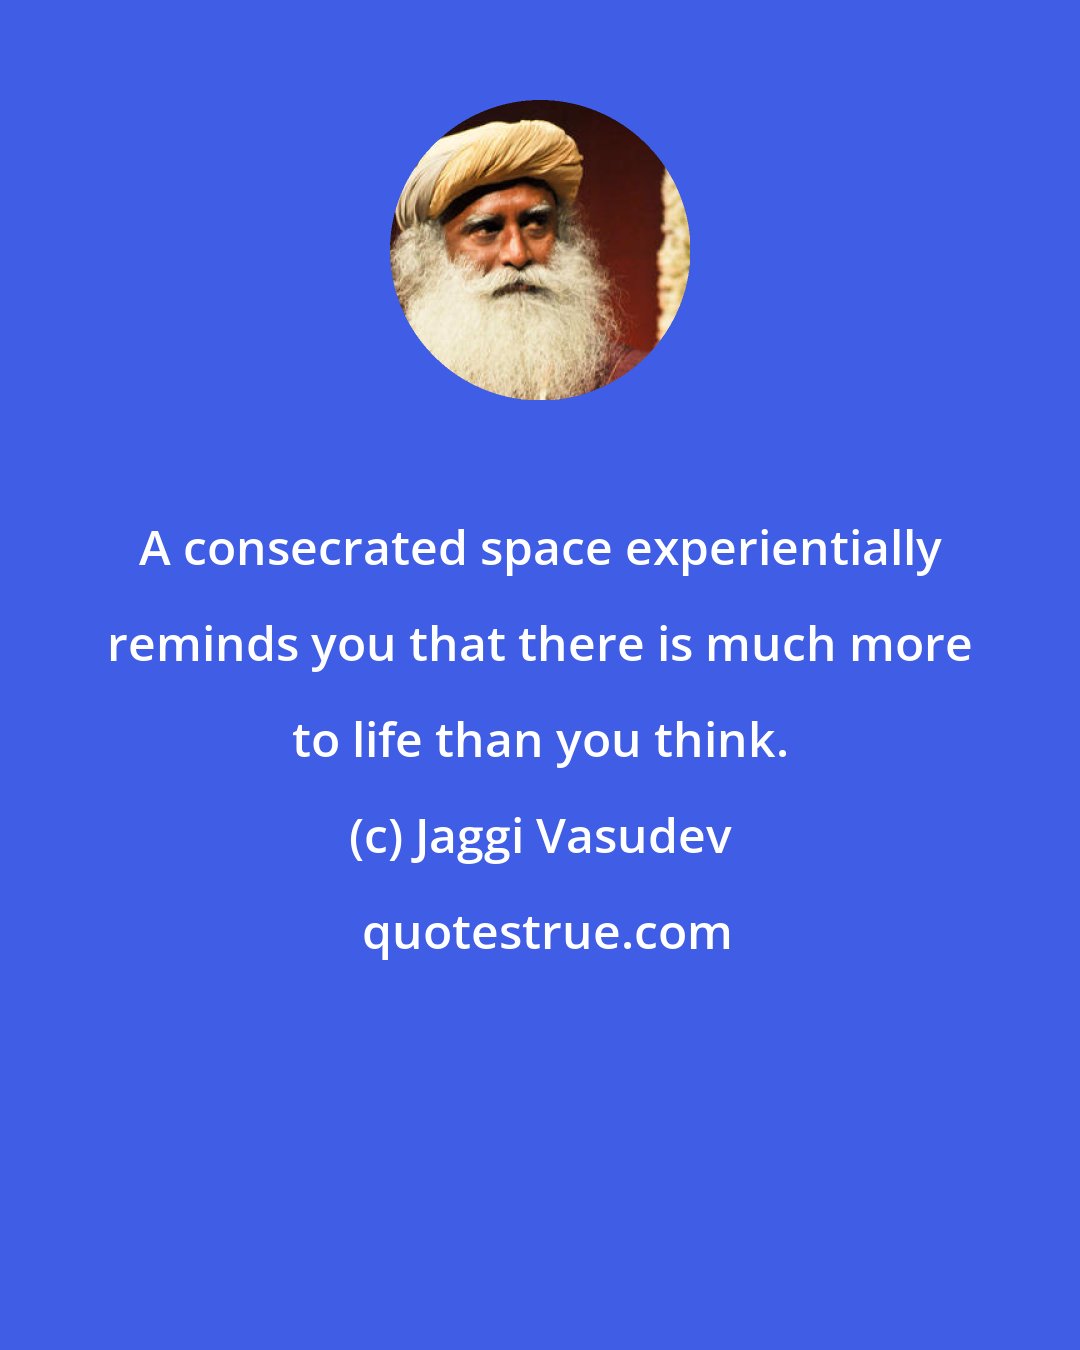 Jaggi Vasudev: A consecrated space experientially reminds you that there is much more to life than you think.